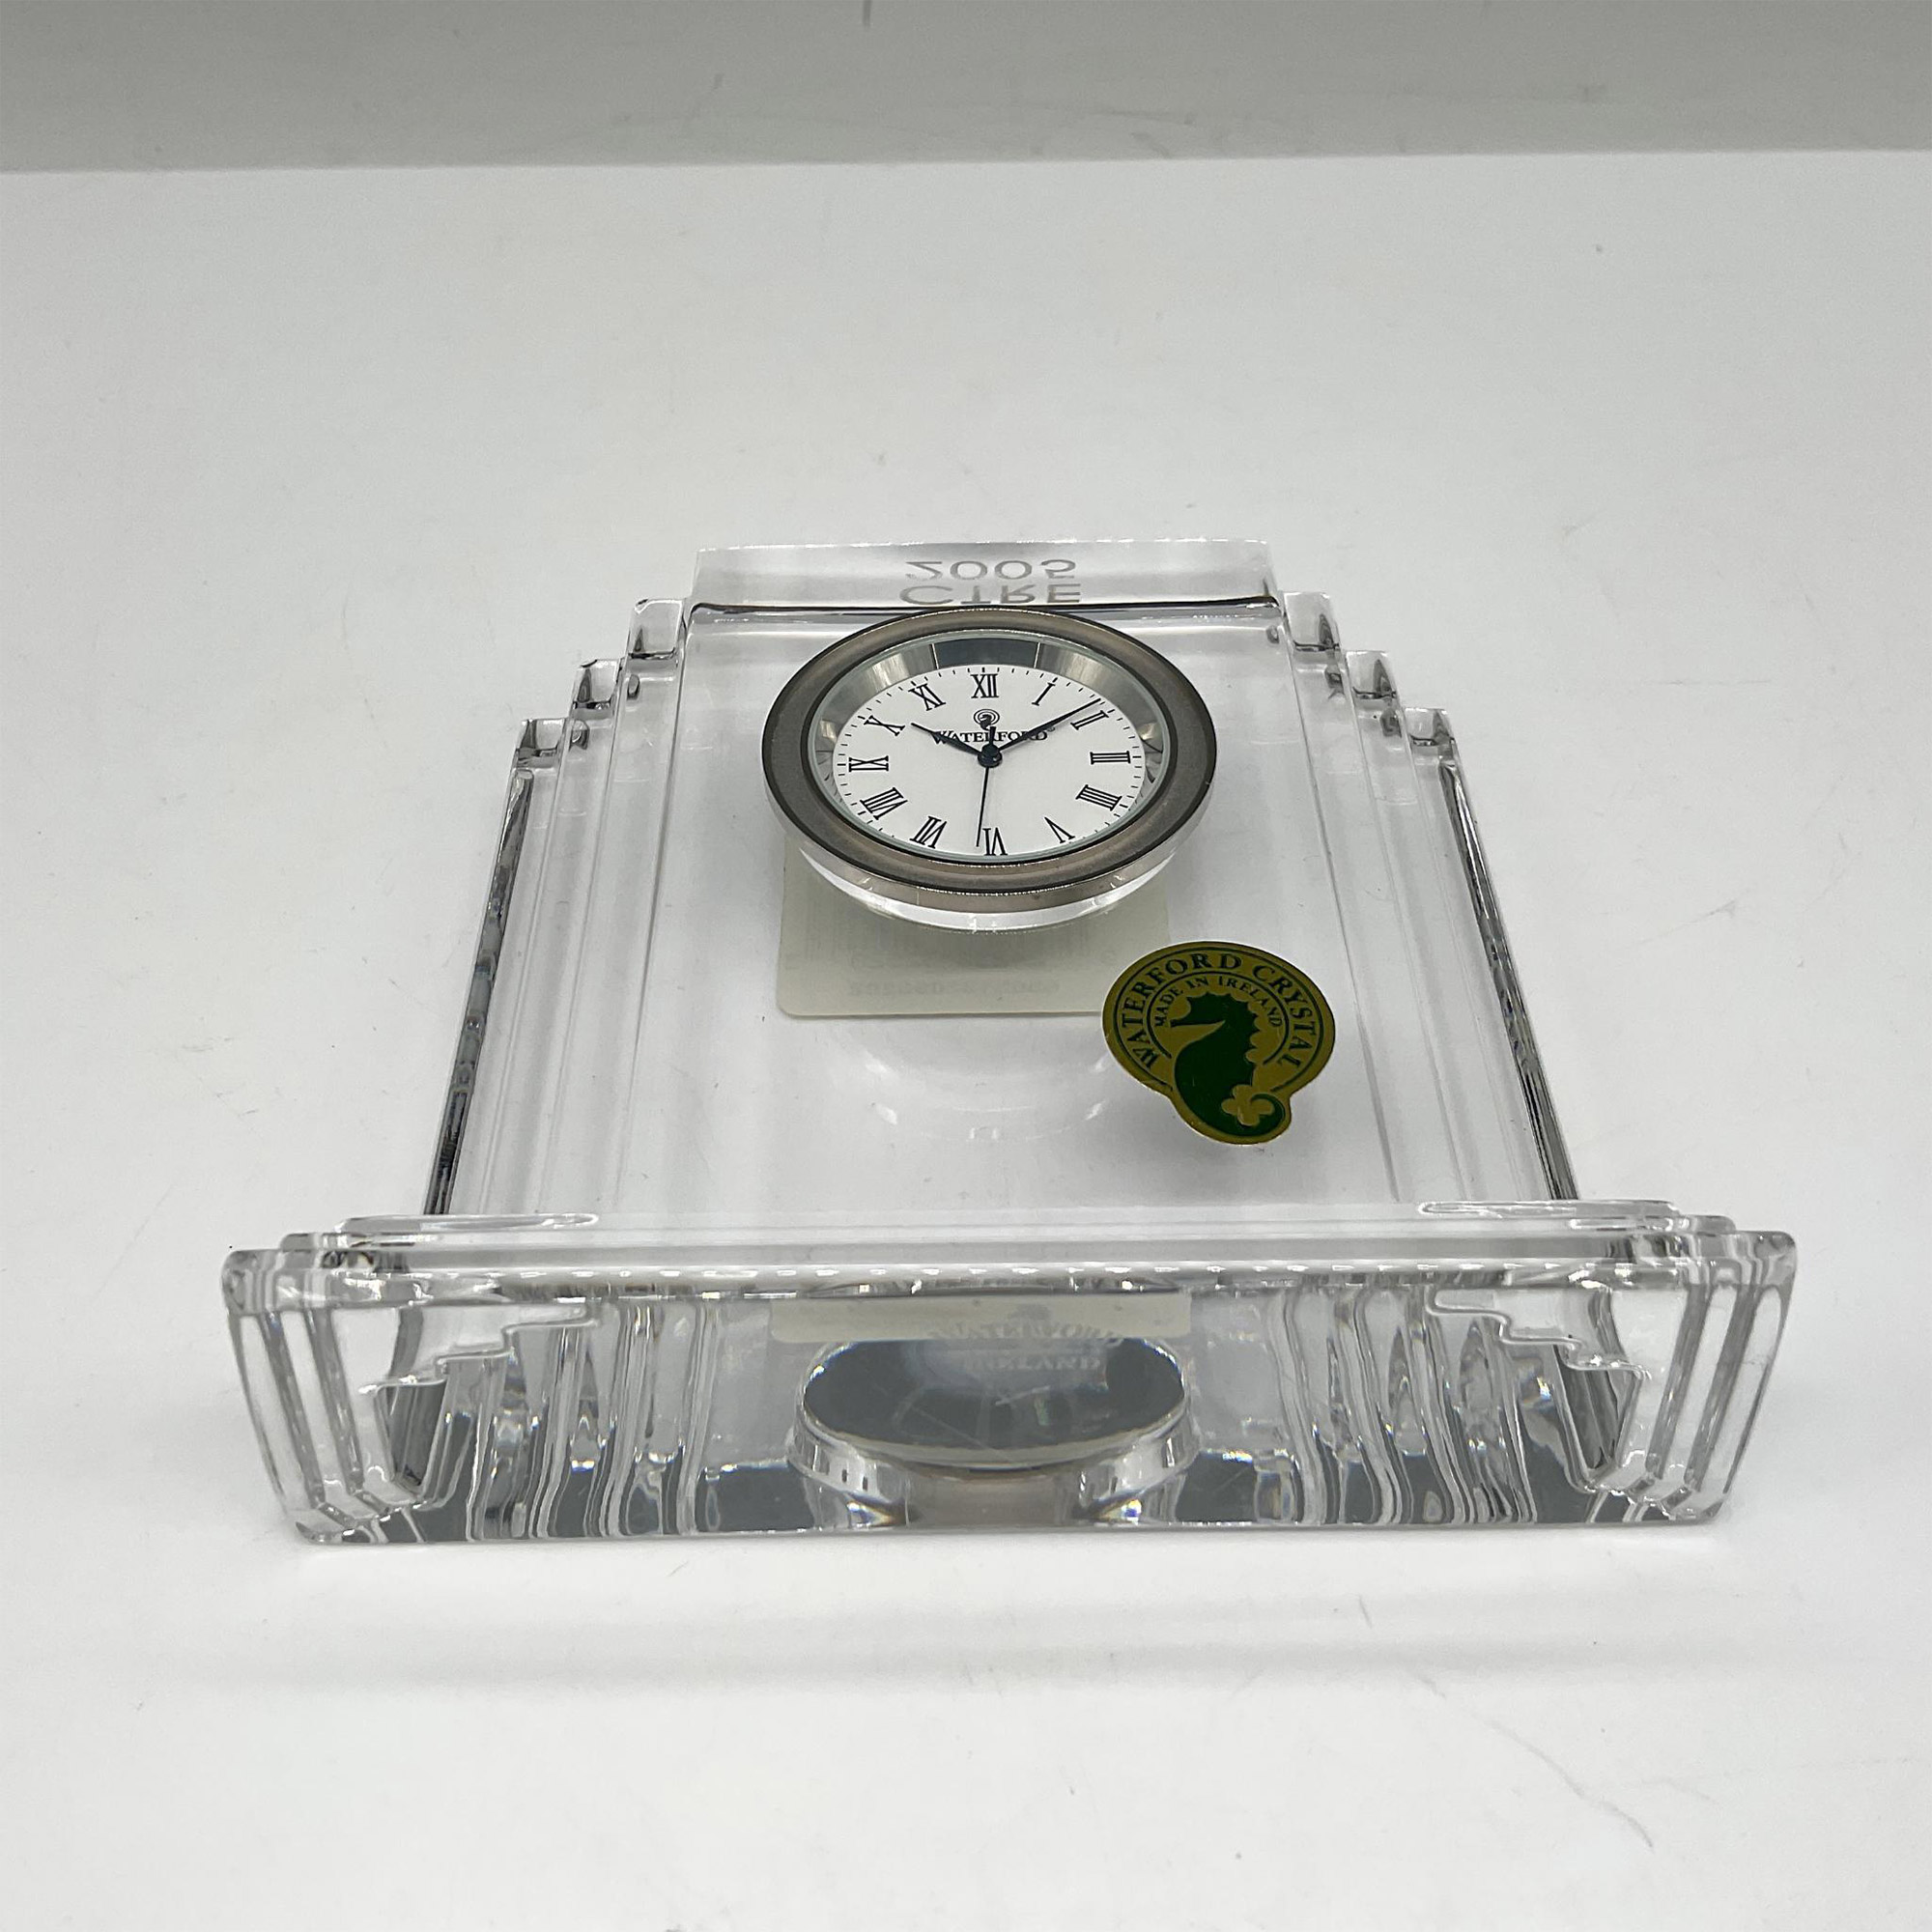 Waterford Crystal Time Pieces, Small Metropolitan Clock - Image 3 of 4